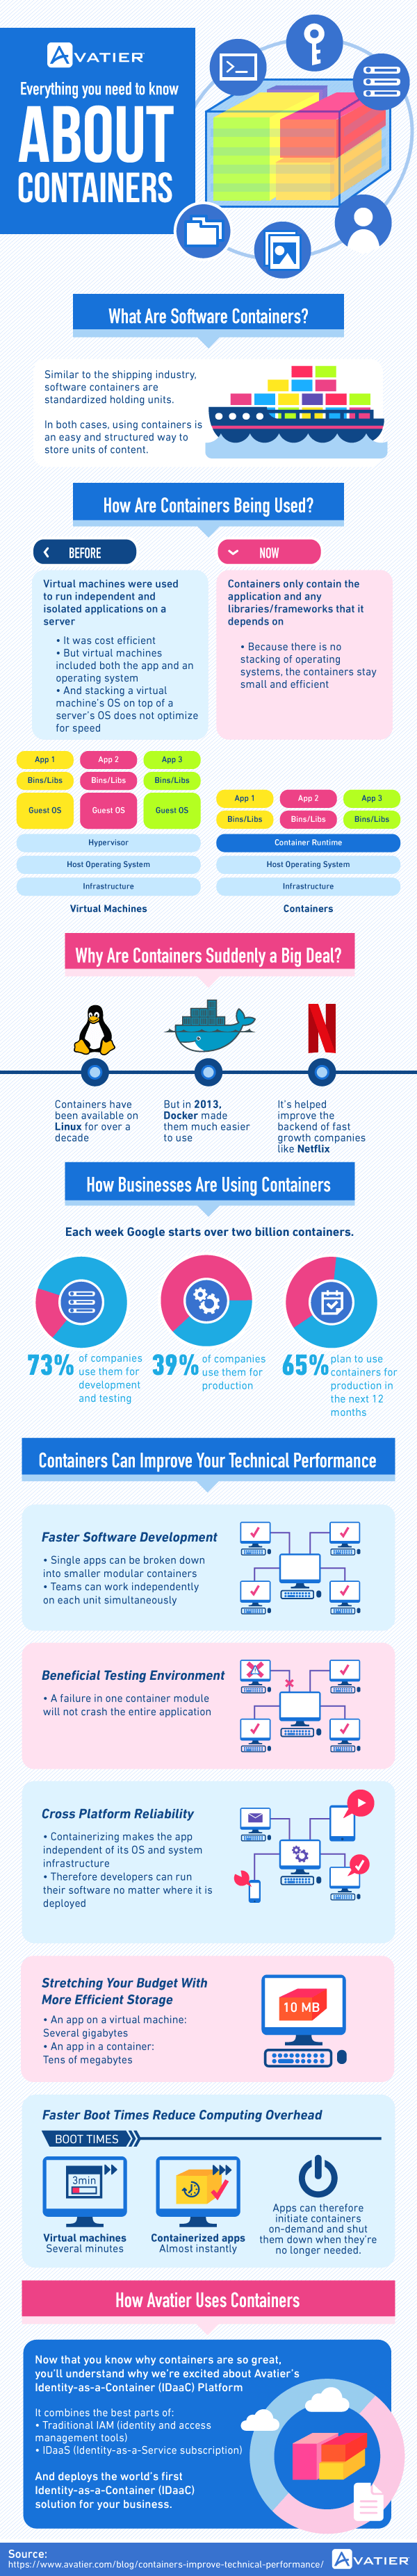 Improve Business Performance Infographic